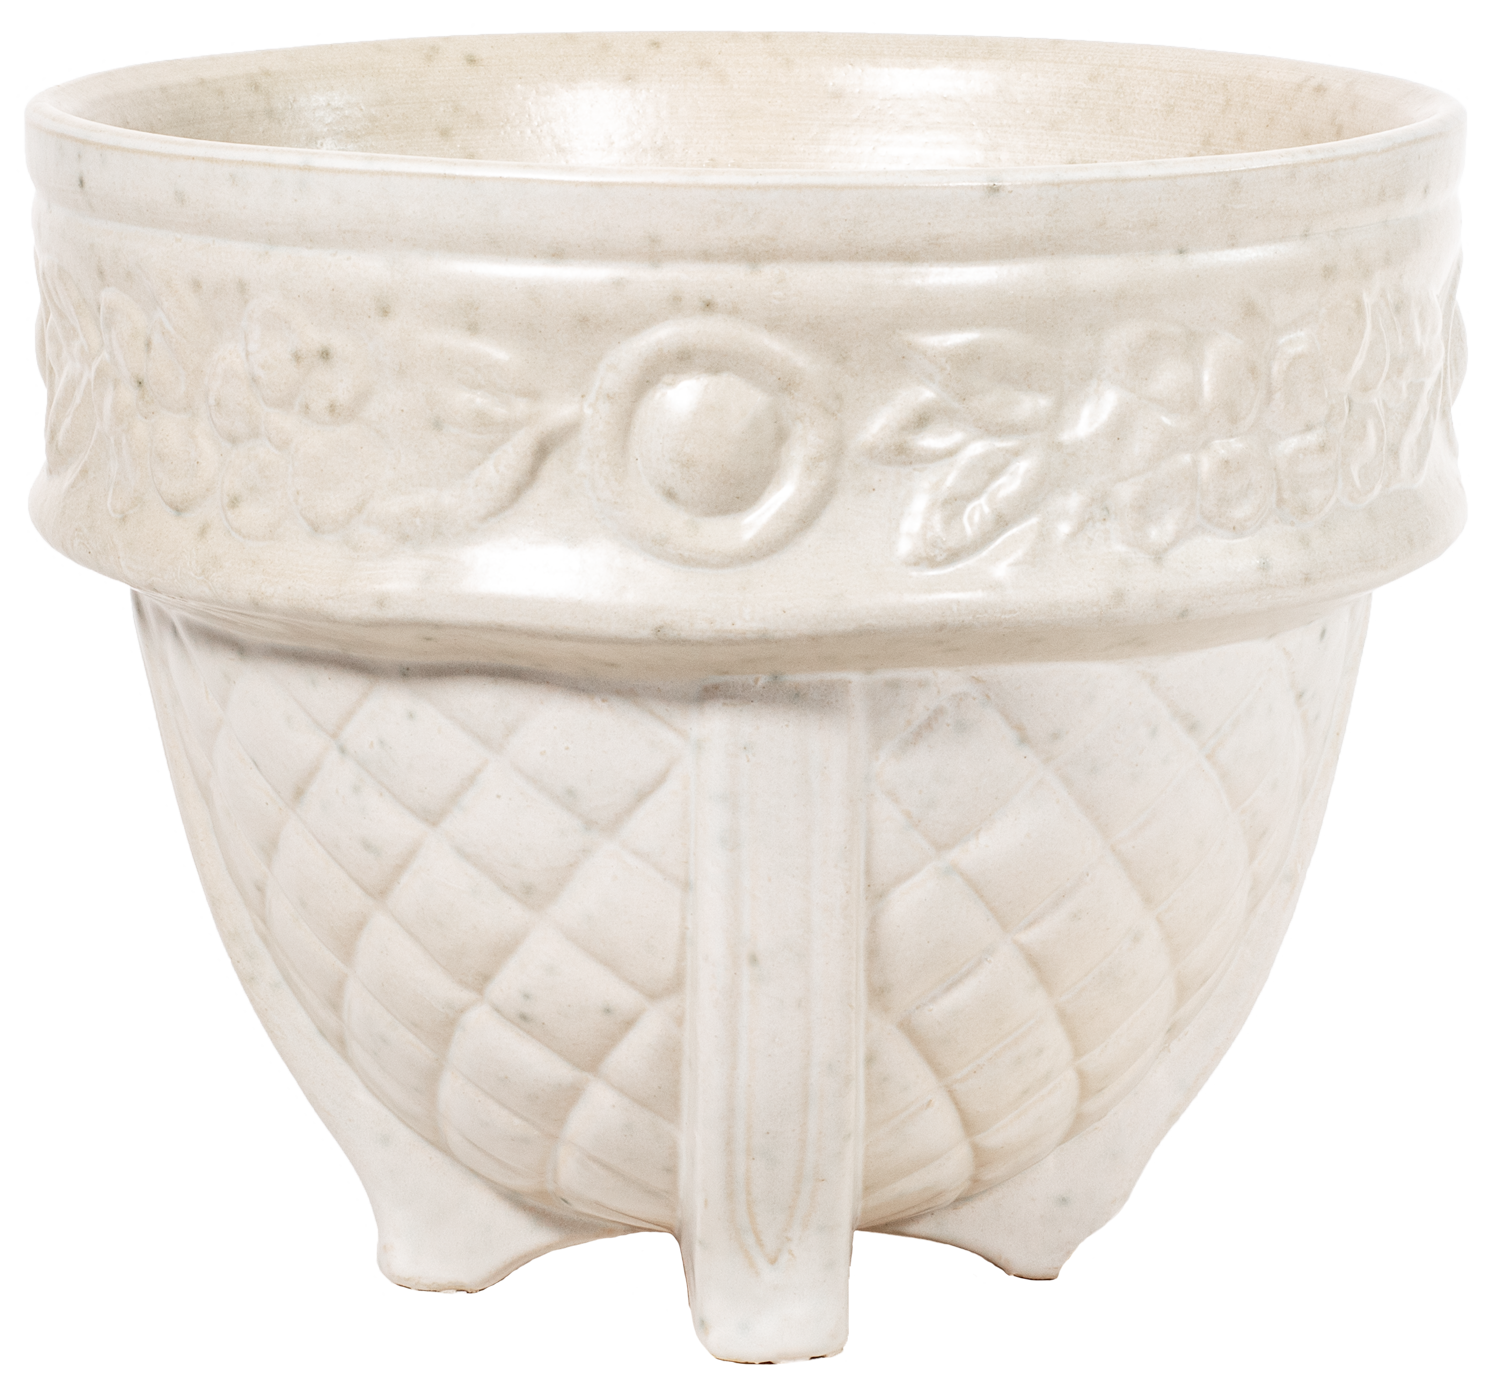 large ceramic white planter with quilted pattern and flower design